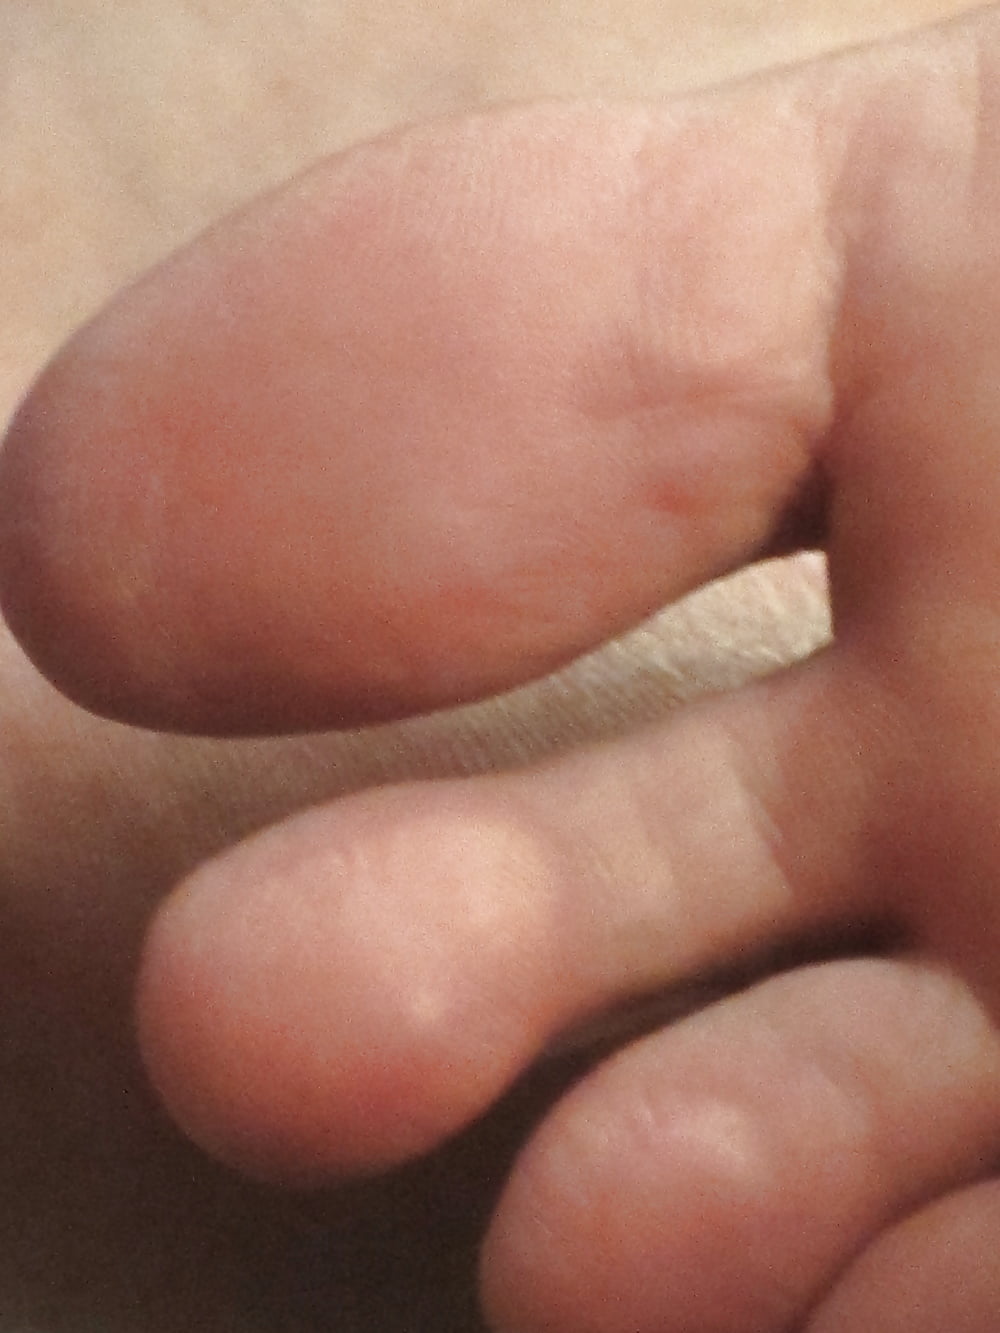 XXX Candid Pics of my Wife's Toes -- No Trannies for a Change!